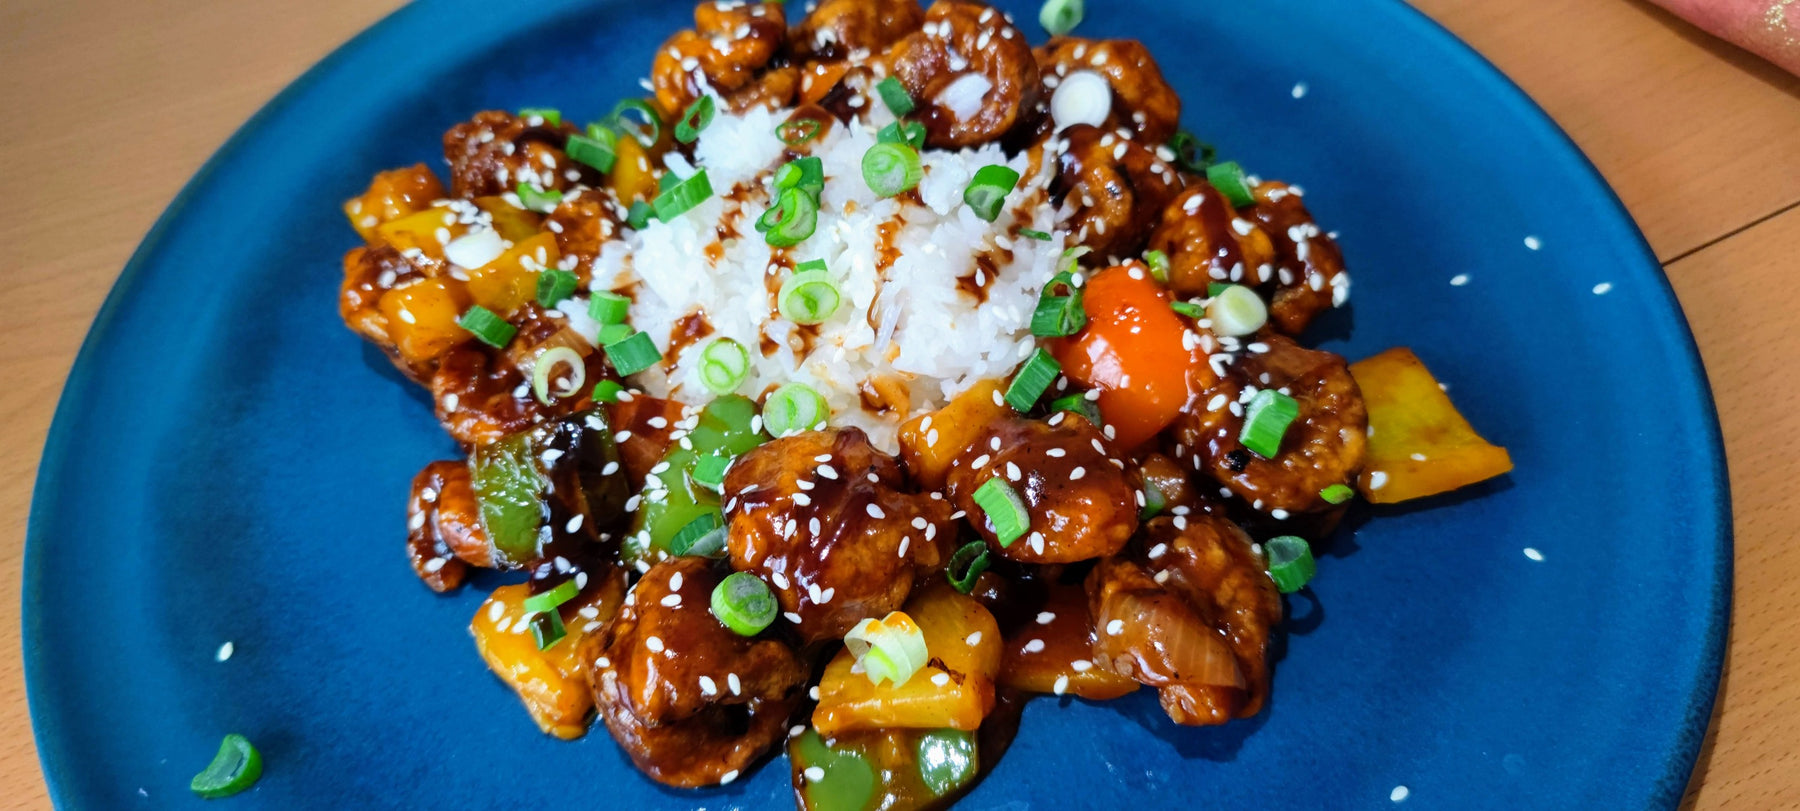 Sweet and sour pork meatballs